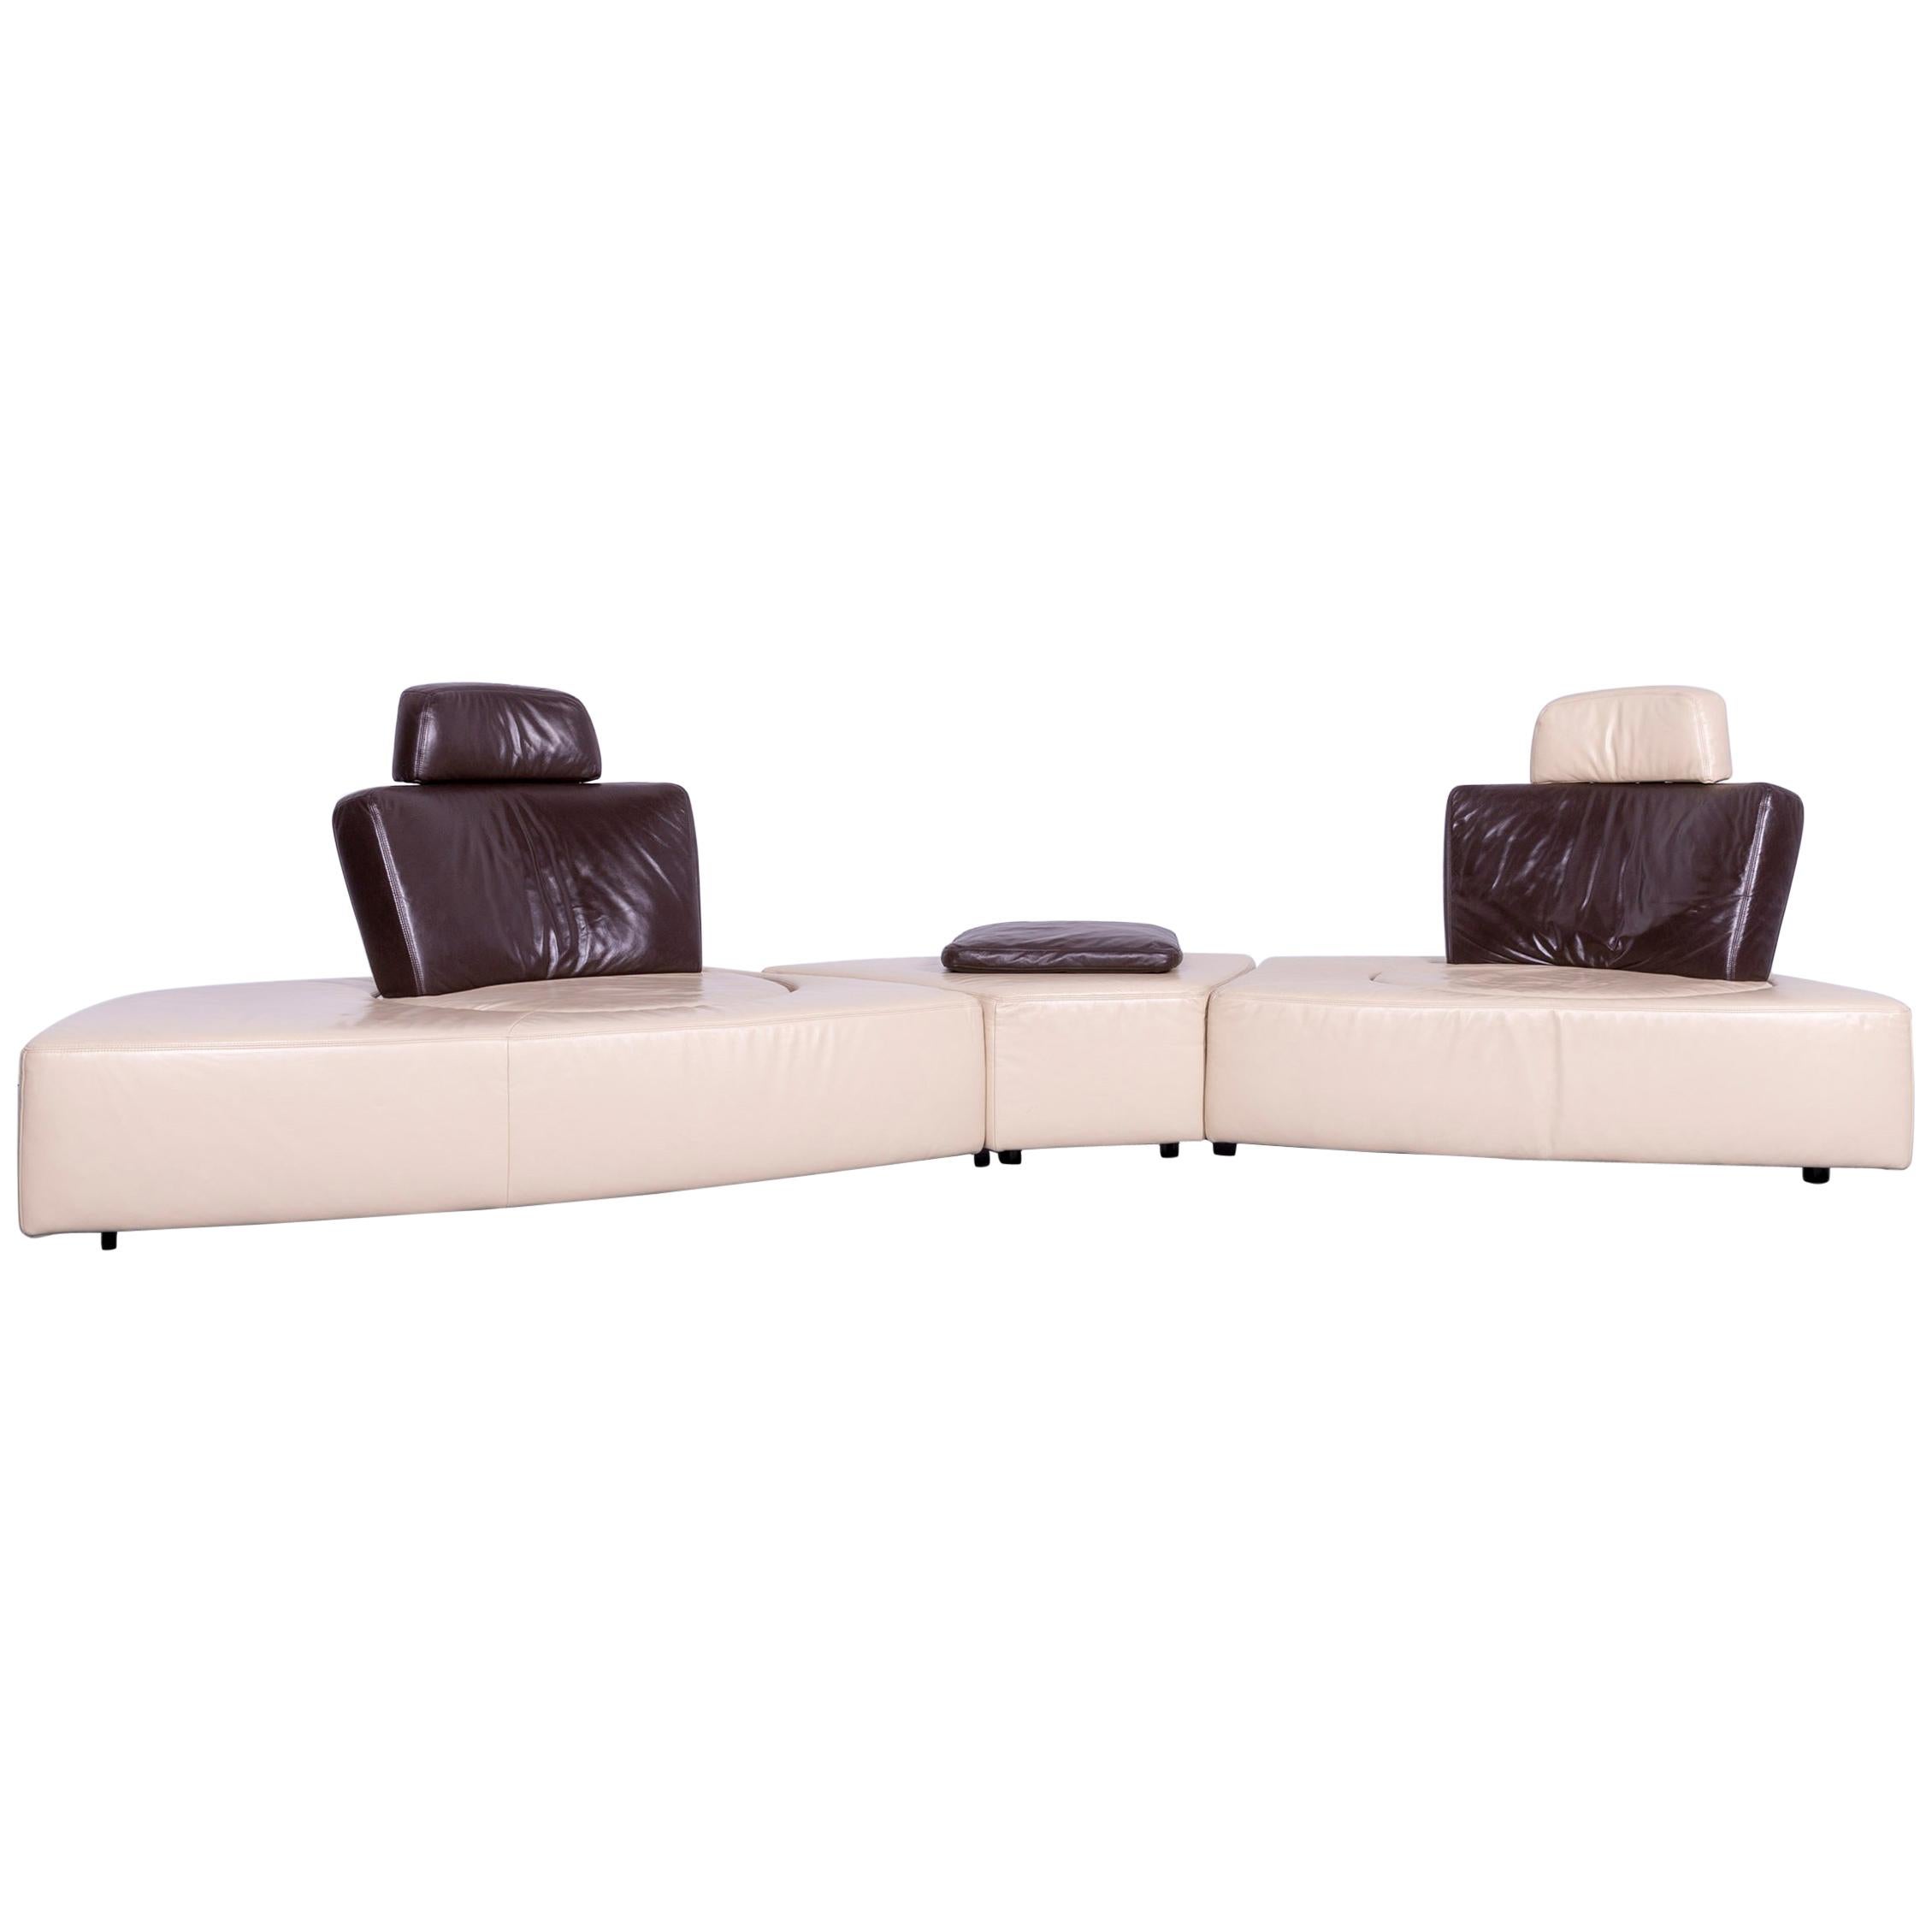 Koinor Leather Corner Sofa Off-White / Brown Four-Seat Function For Sale